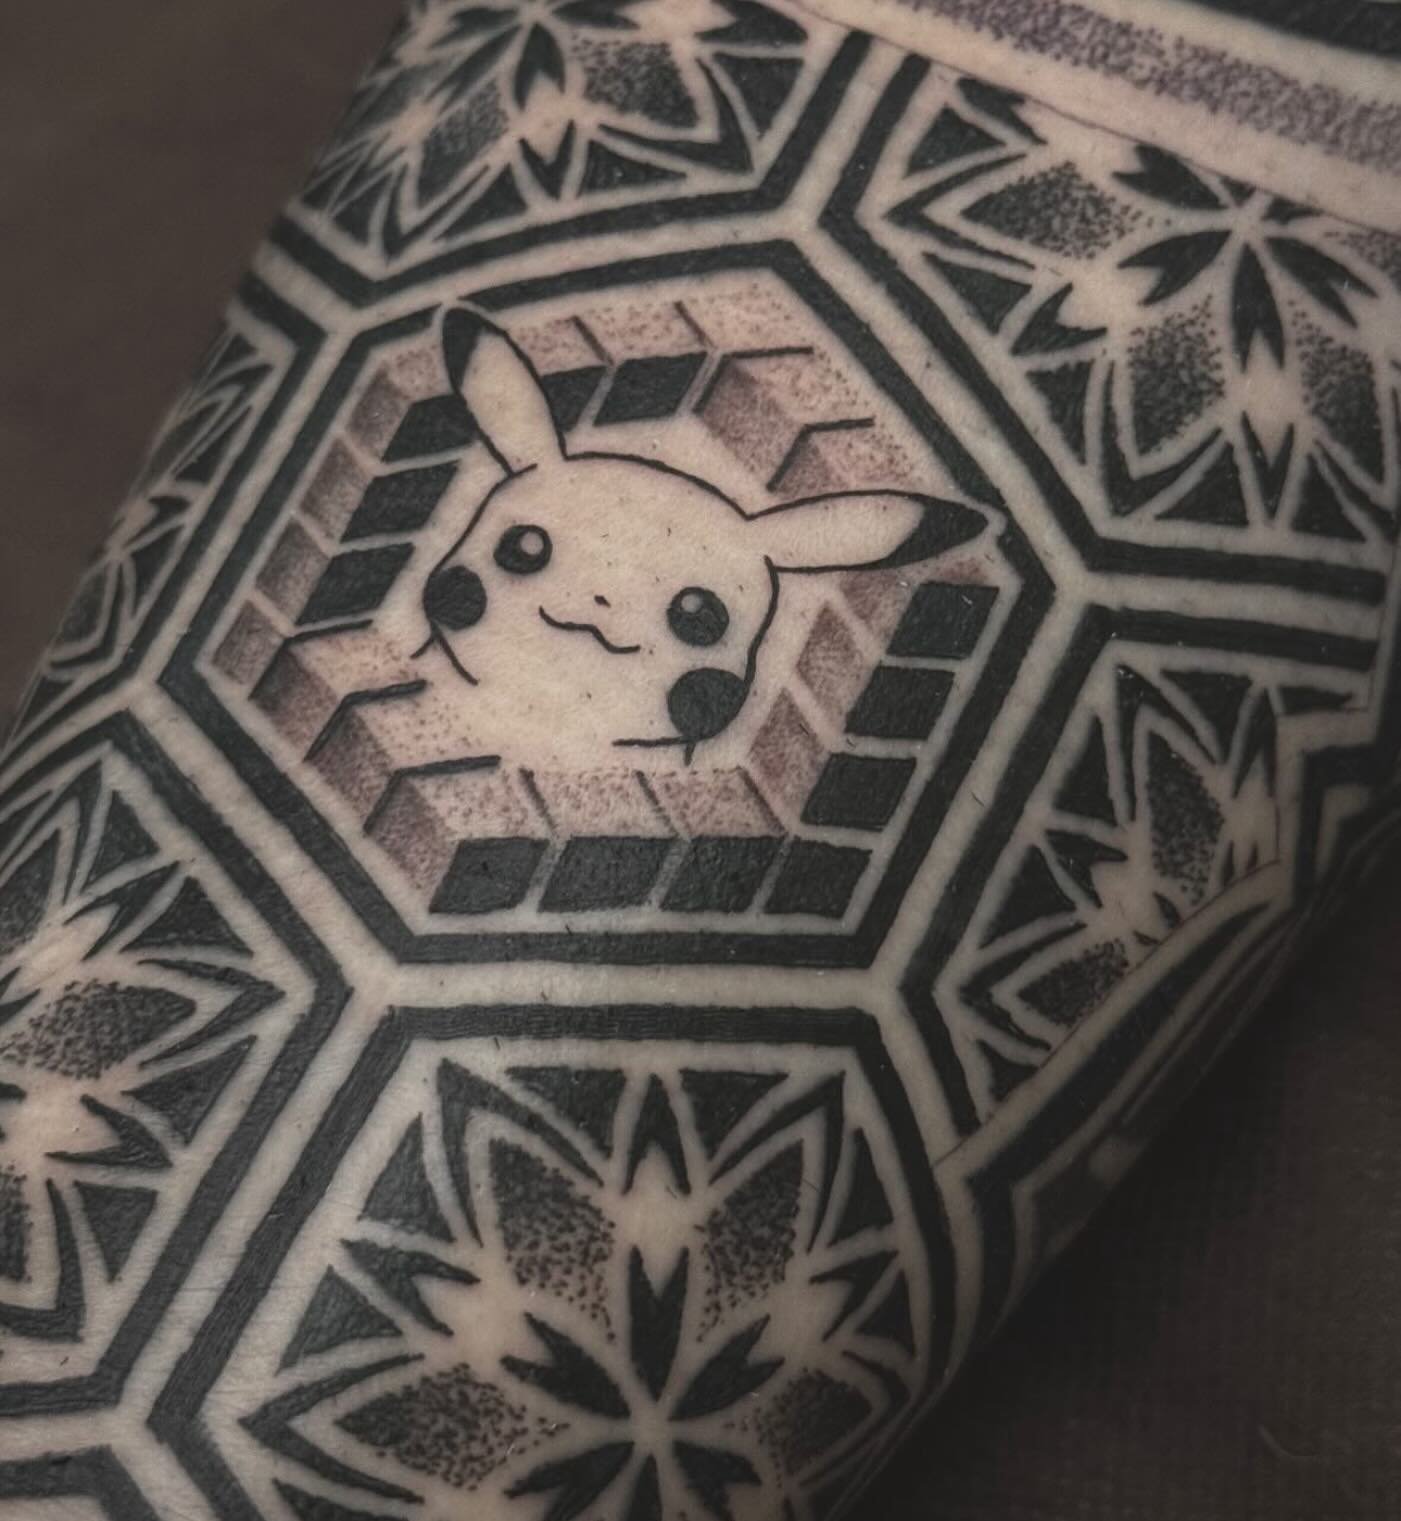 Pika pika!  So stoked on this one by @blvck_maz #gottacatchemall